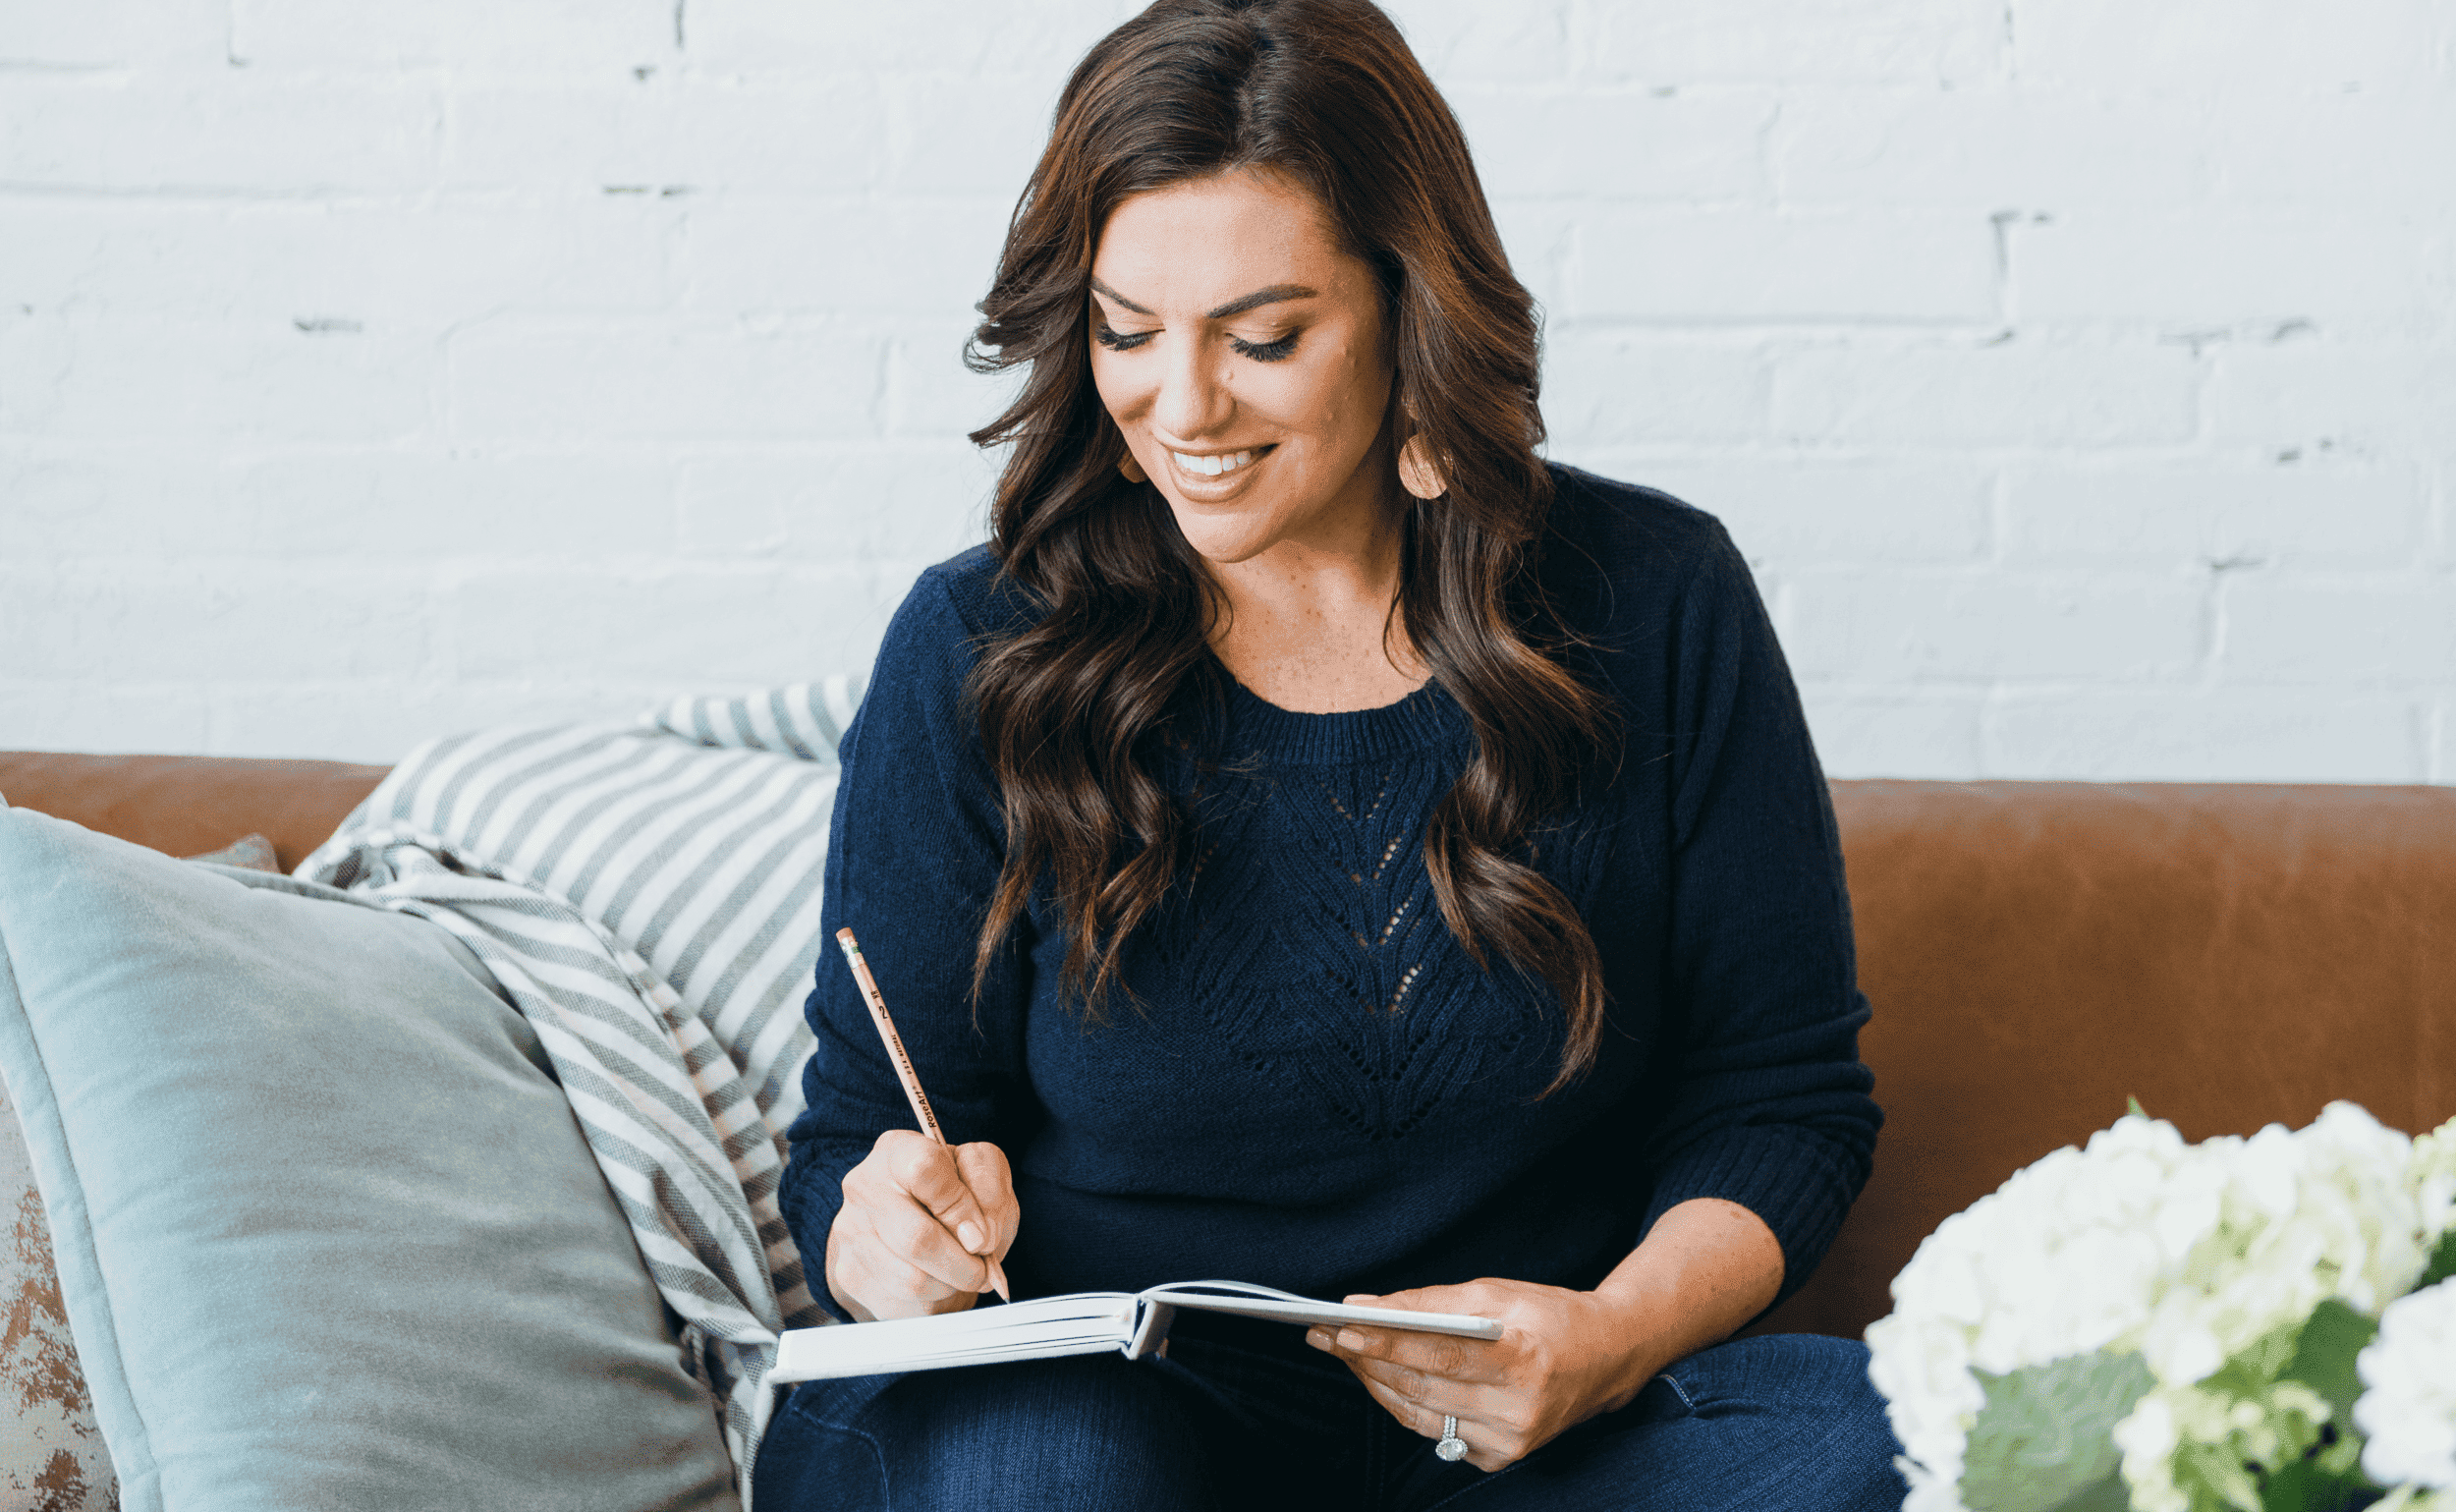 Amy Porterfield as a sales and marketing expert